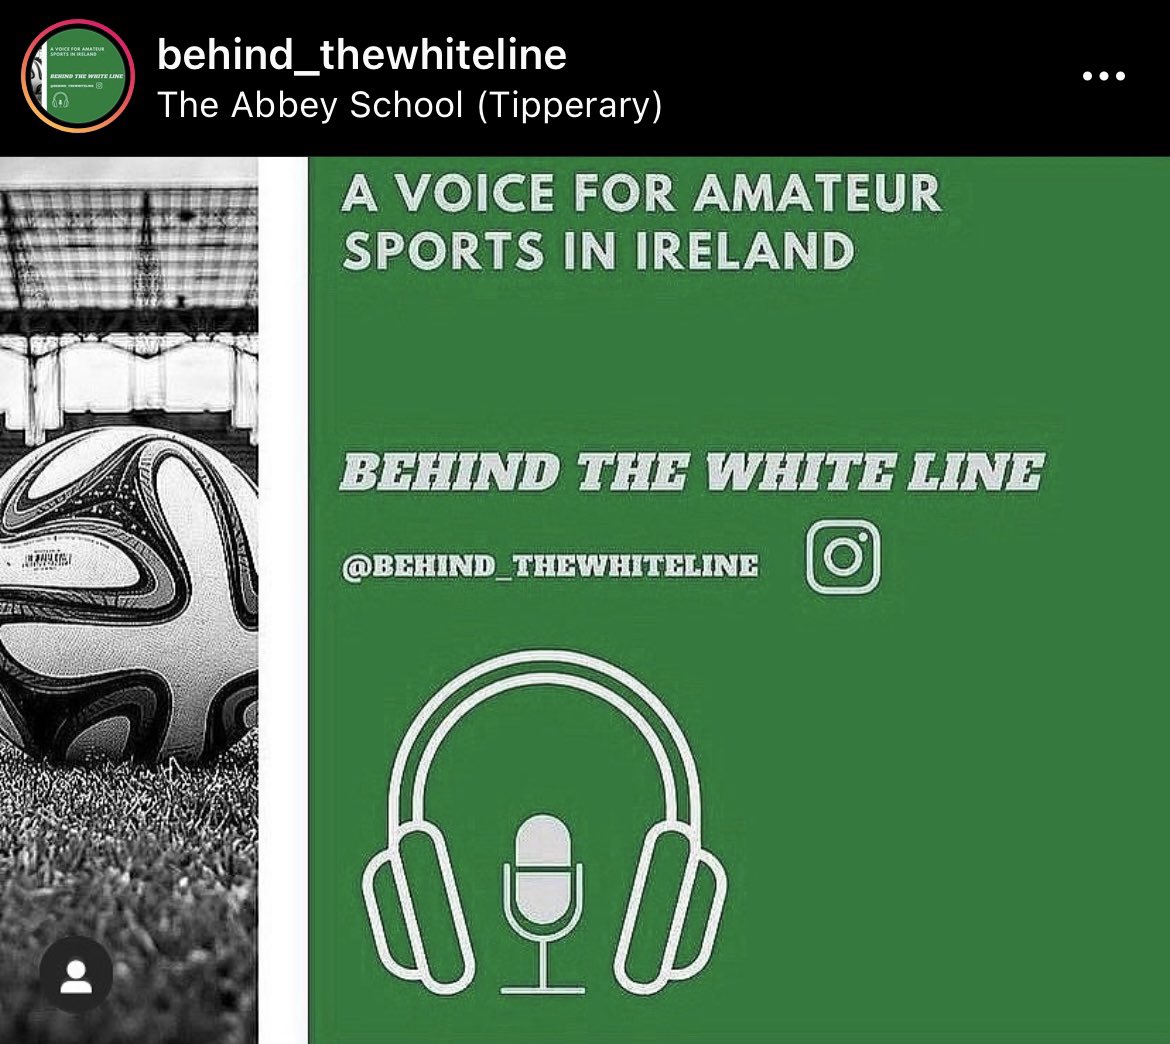 Be sure to catch up with the Behind The White Line podcast on Spotify to get a sense of the history of sport at The Abbey School. Special guests include our PE & Irish teacher Mr Hanley along with Conor O Brien, a past student & All Ireland Winner! 🇳🇬